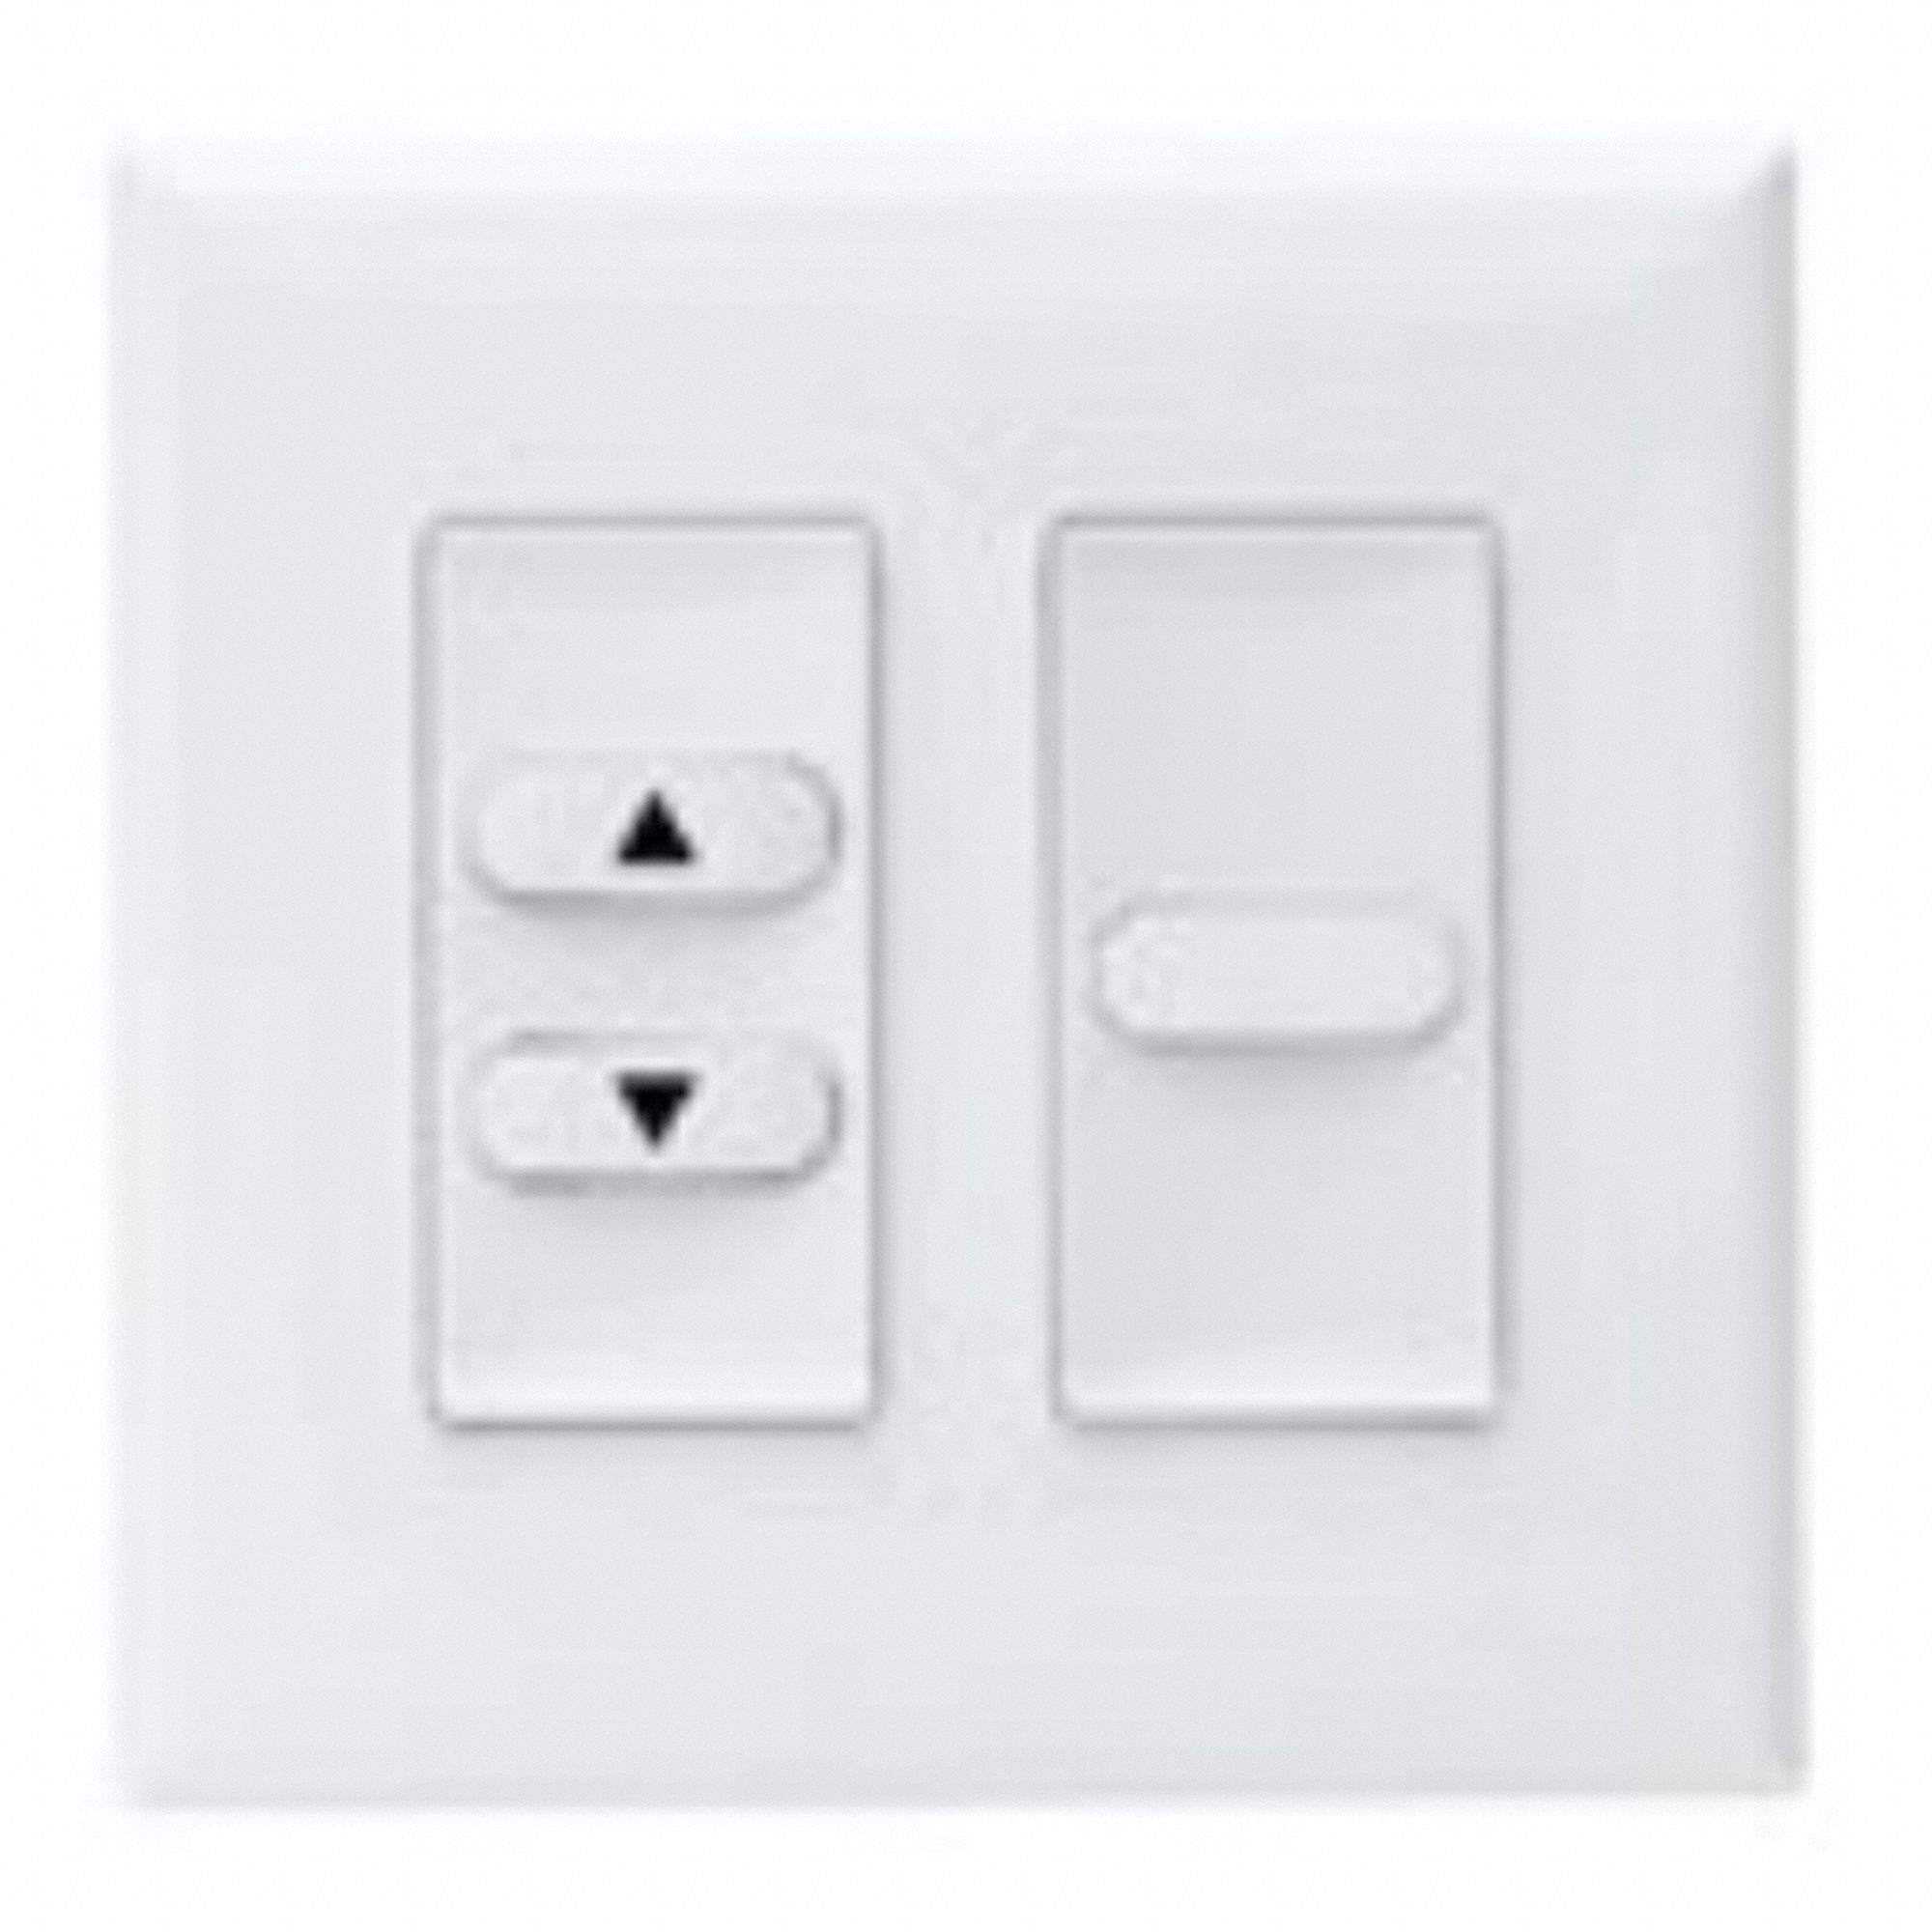 PROGRAMMABLE 4 BUTTON SWITCH, LOW VOLTAGE, IVORY